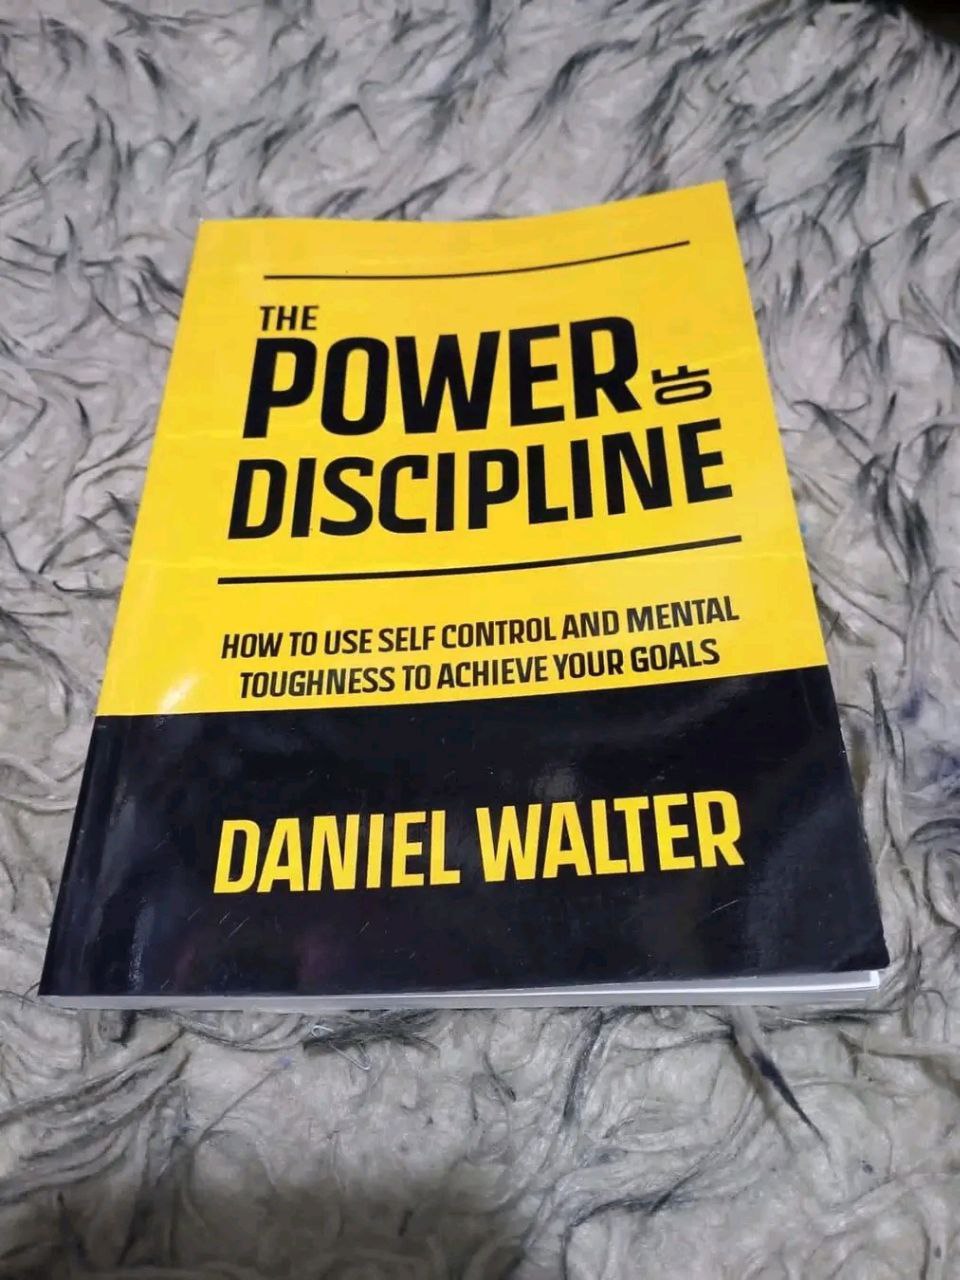 10 Important Advices from “The Power of Discipline”